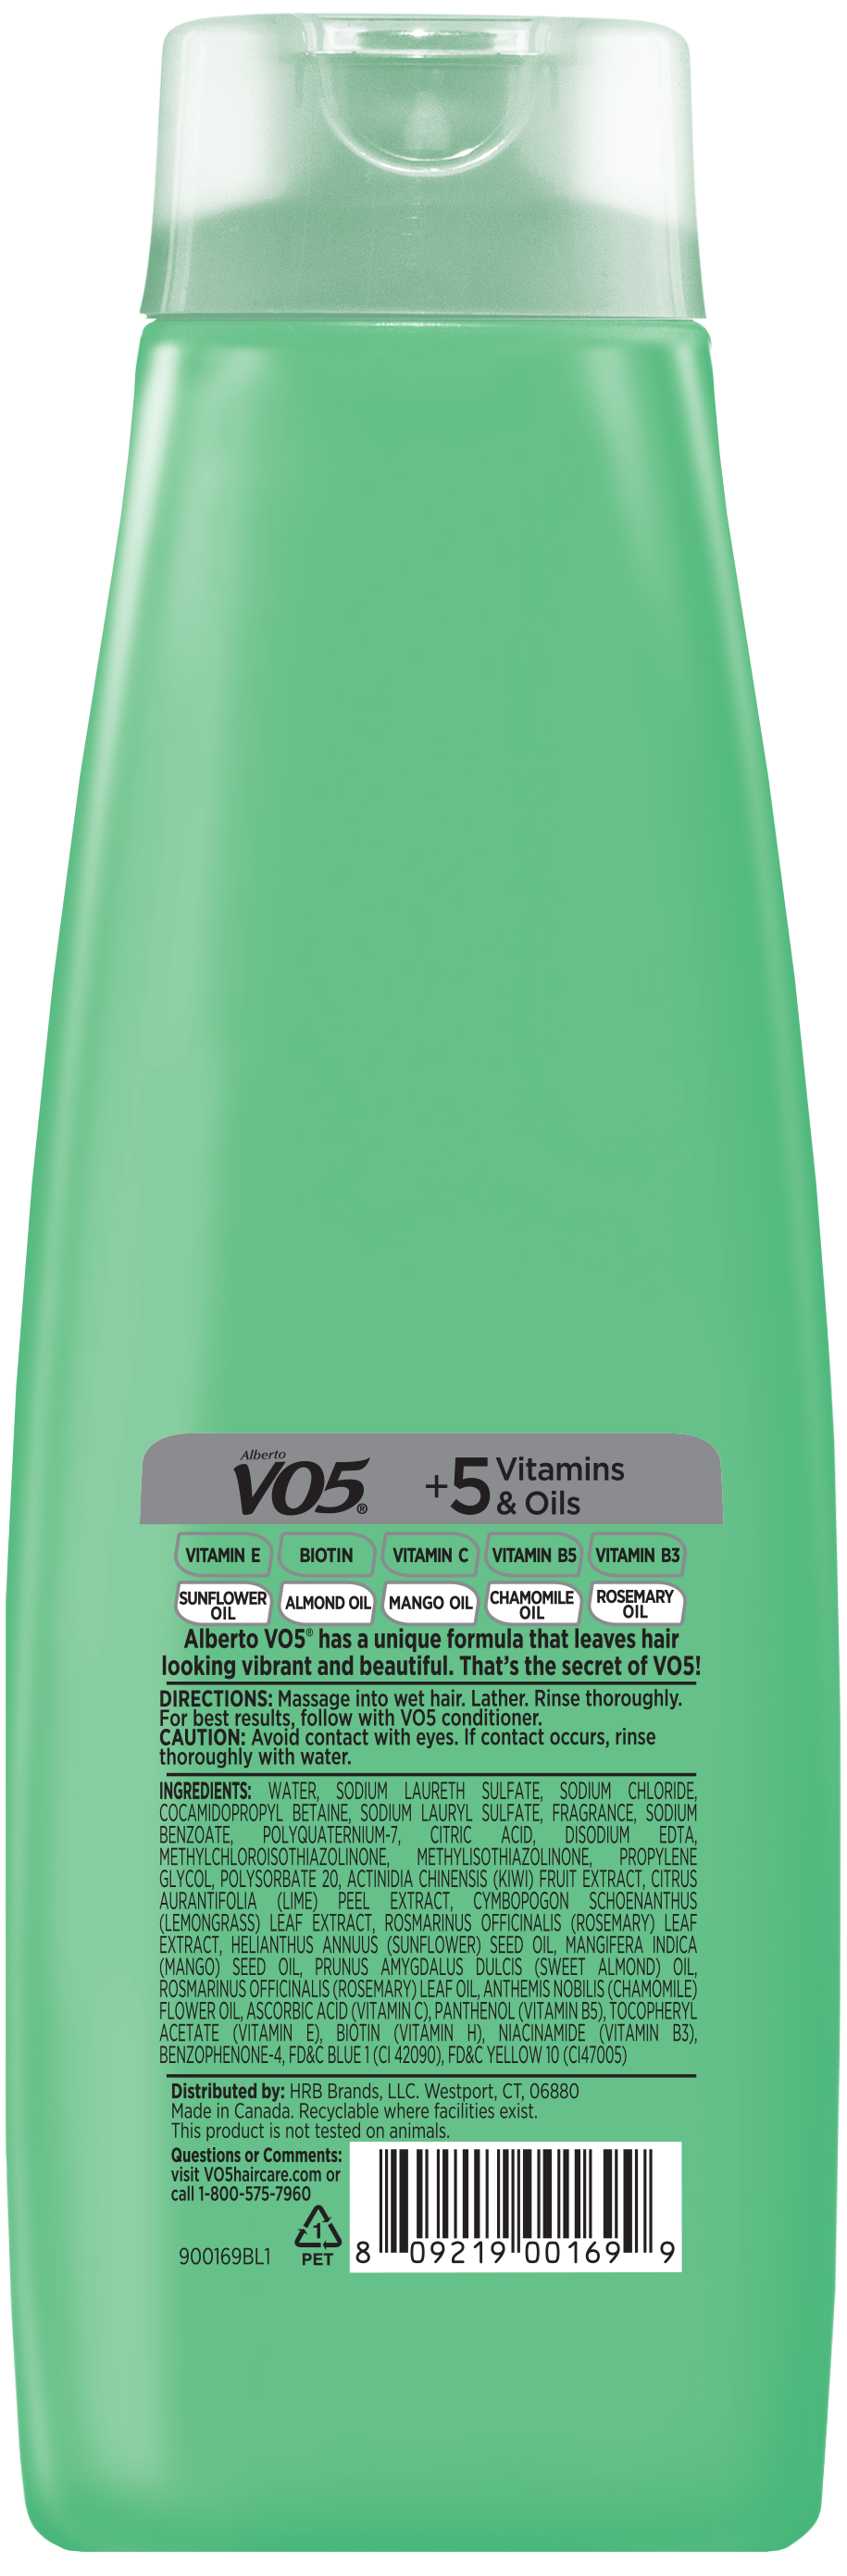 Alberto VO5 Kiwi Lime Squeeze Clarifying Shampoo with Vitamin E & C, for All Hair Types, 16.9 fl oz - image 2 of 6